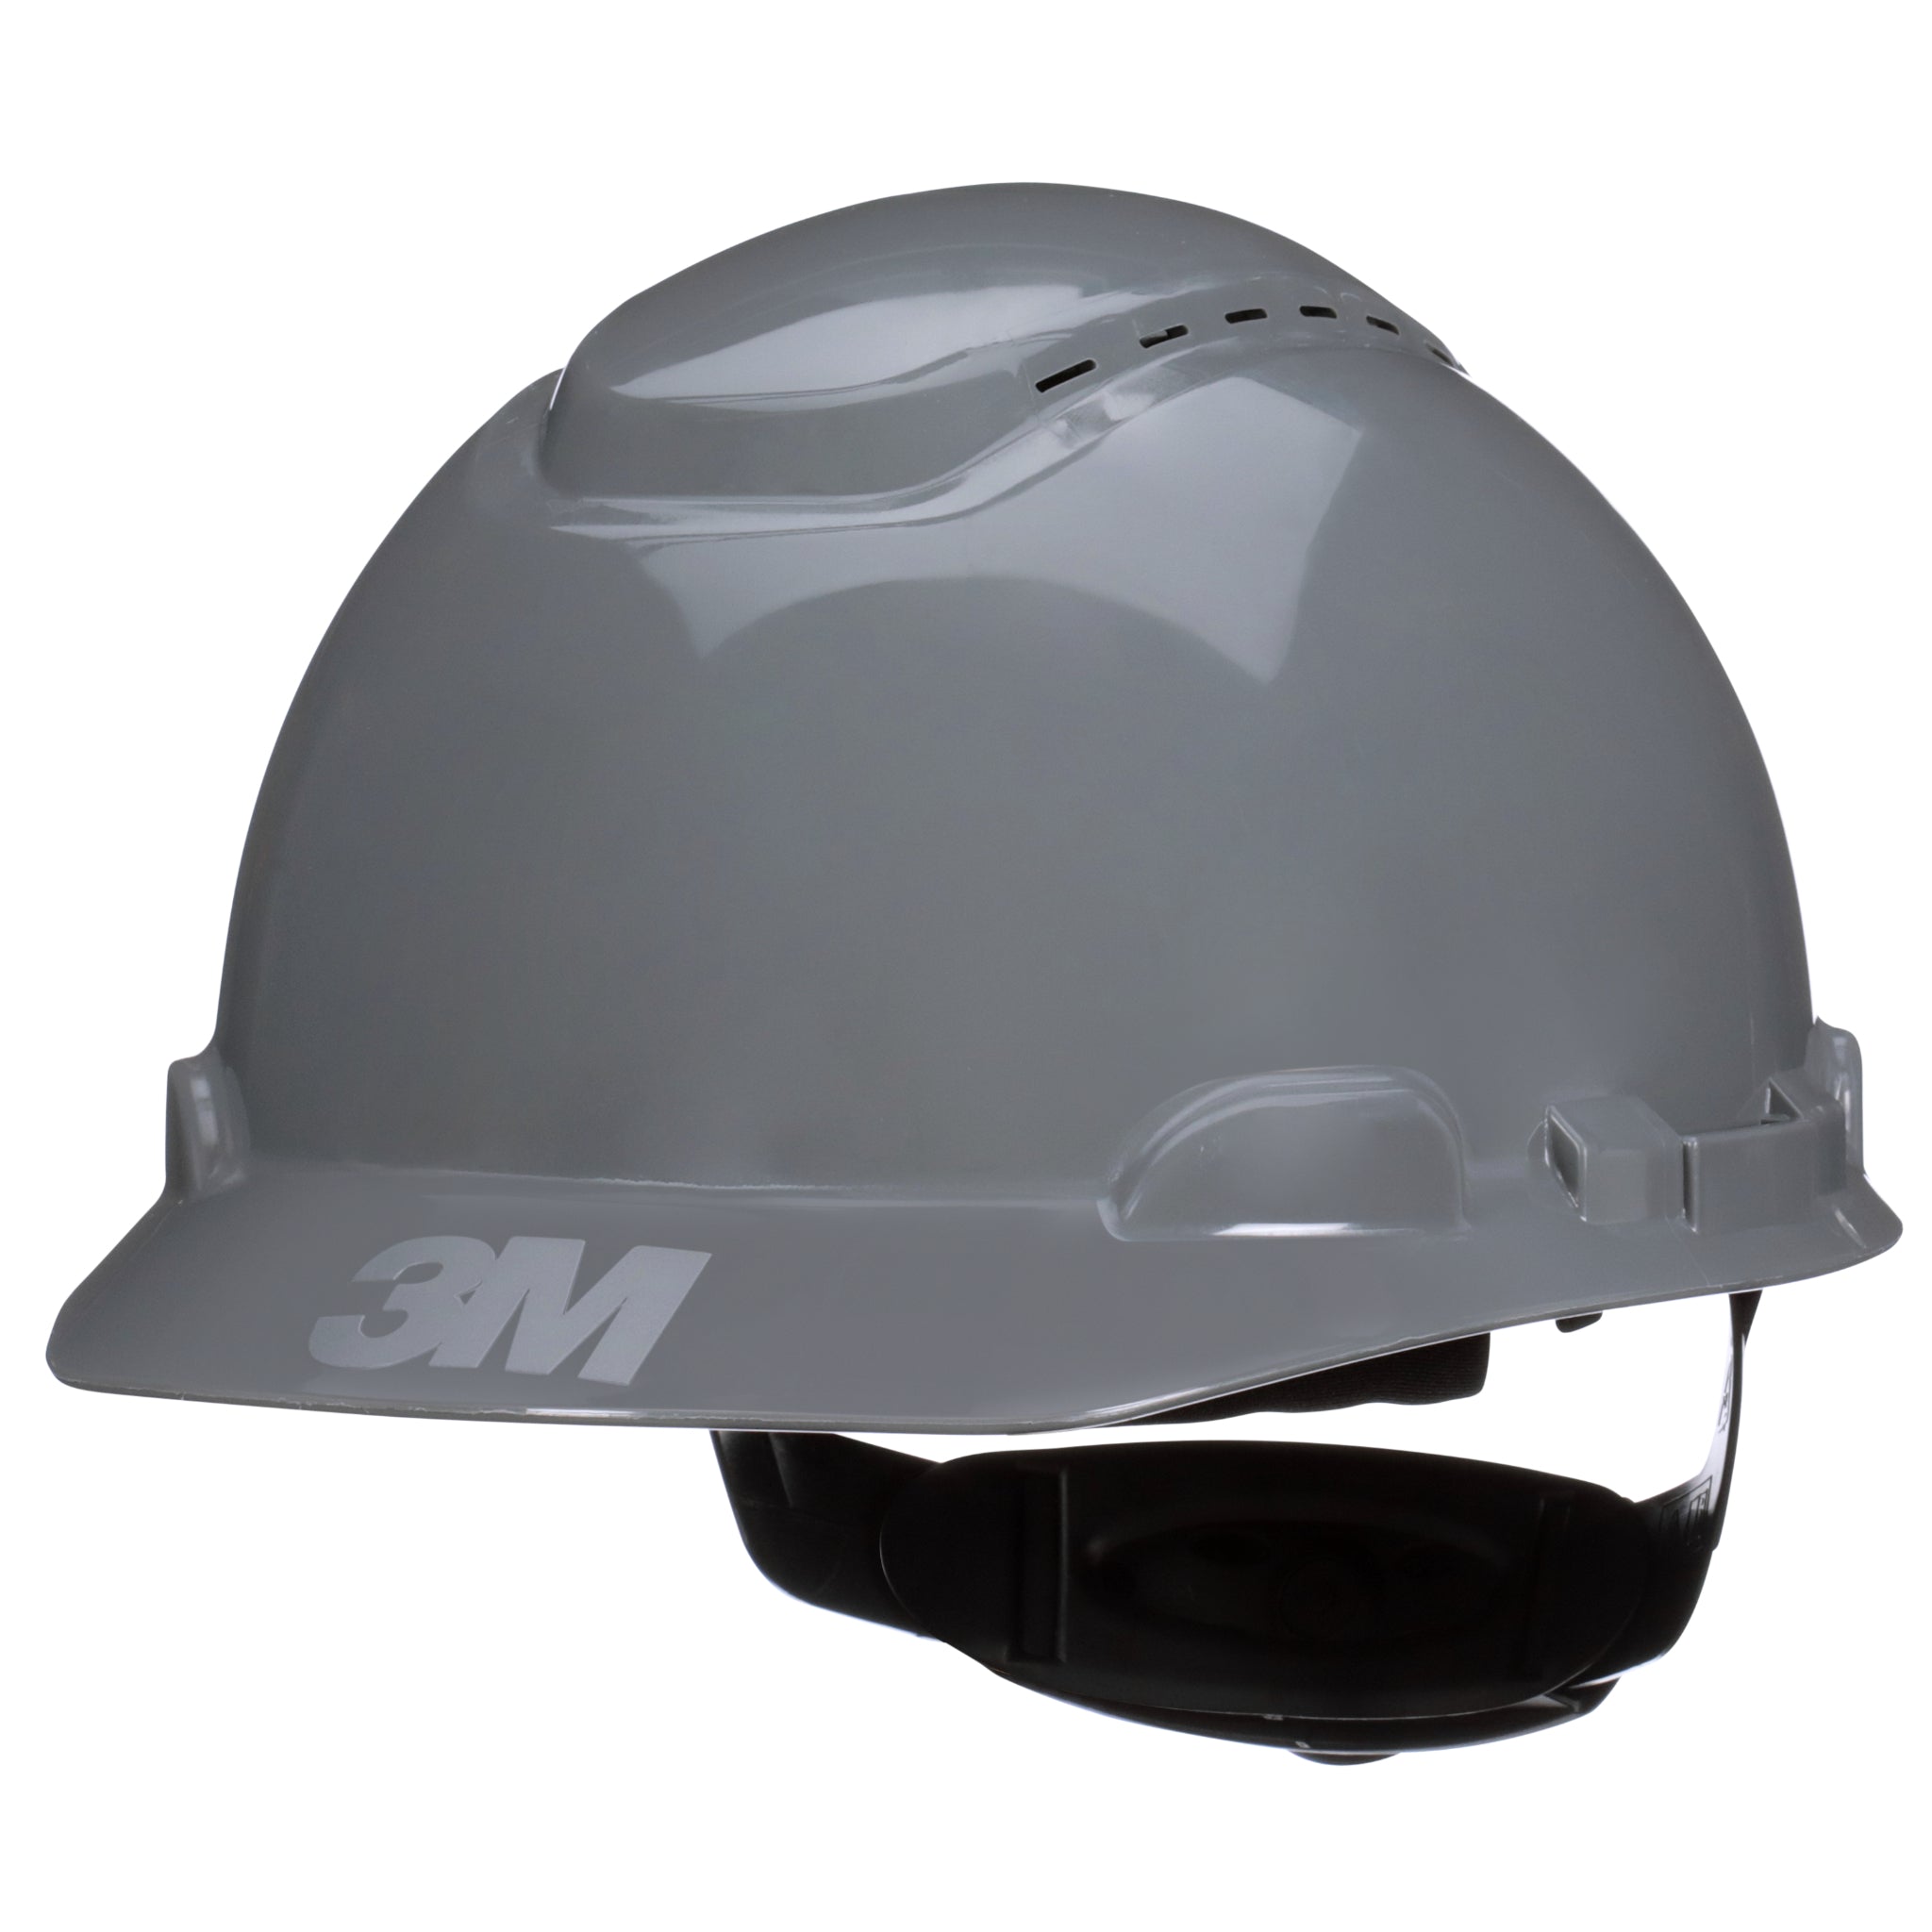 3M SecureFit Hard Hat H-708SFV-UV, Grey, Vented, 4-Point Pressure Diffusion Ratchet Suspension, with UVicator, 20 ea/Case